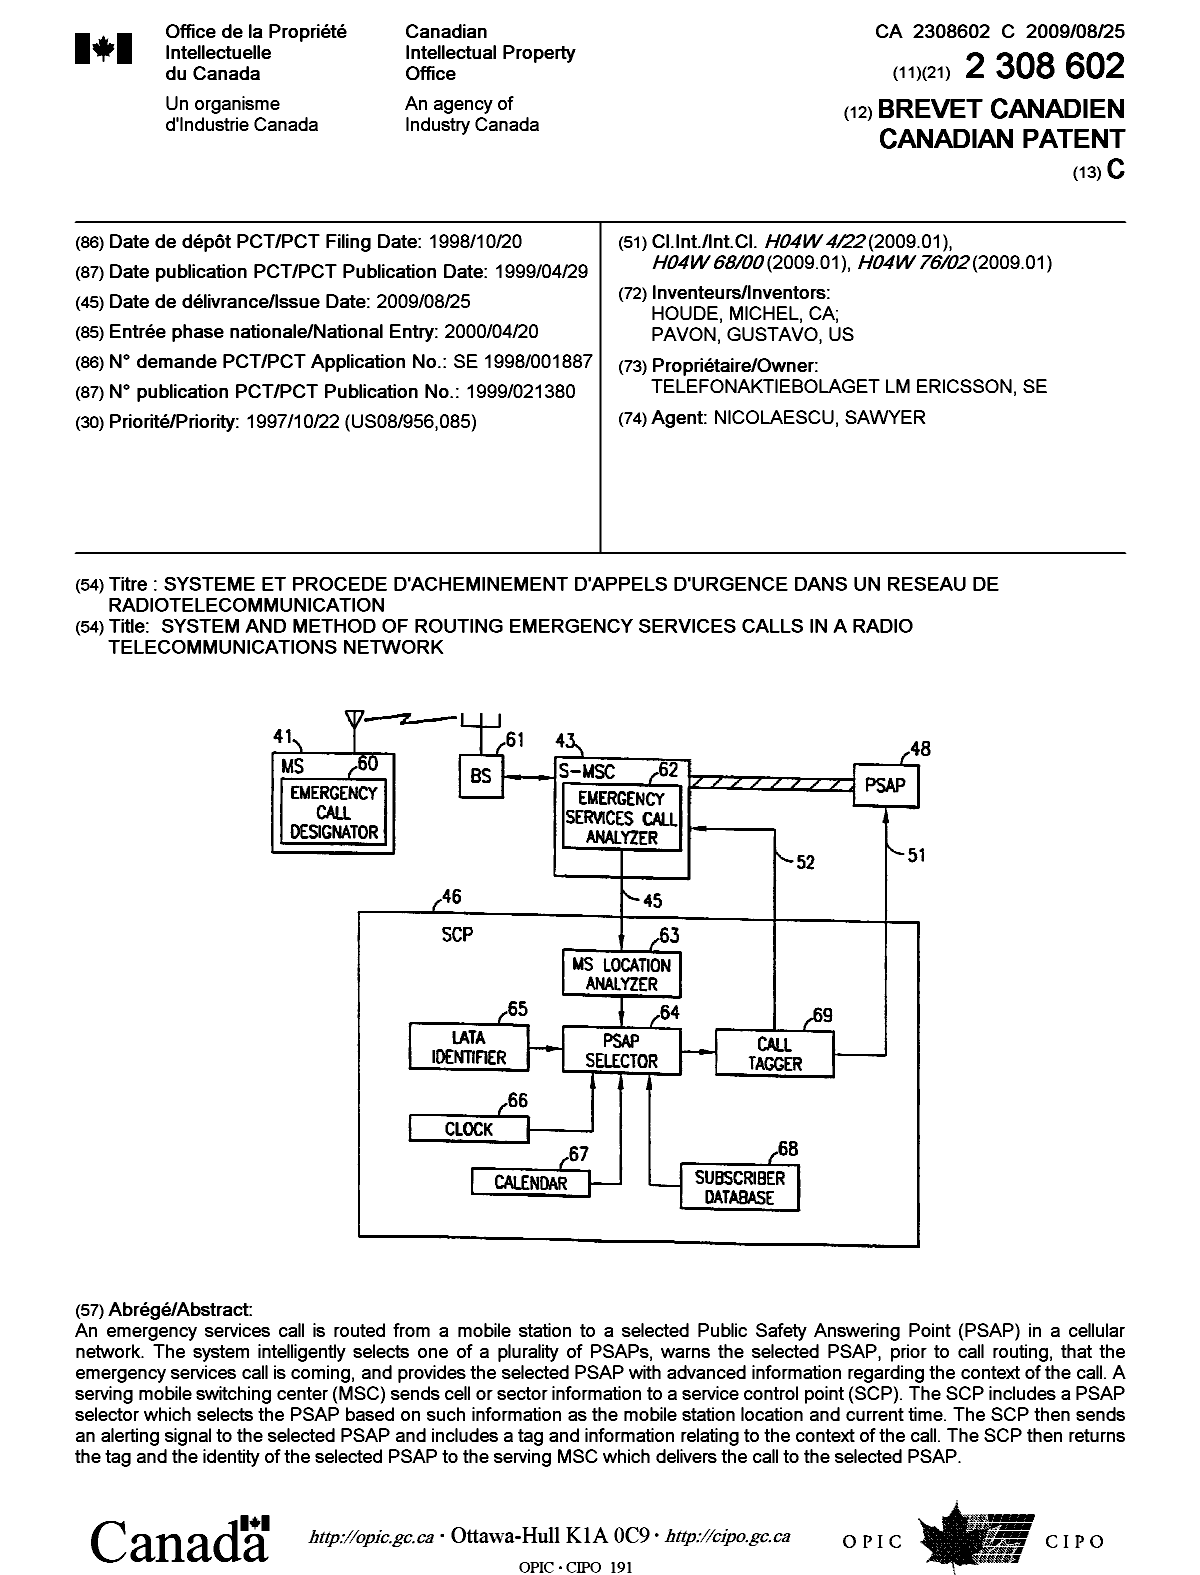 Canadian Patent Document 2308602. Cover Page 20090728. Image 1 of 1